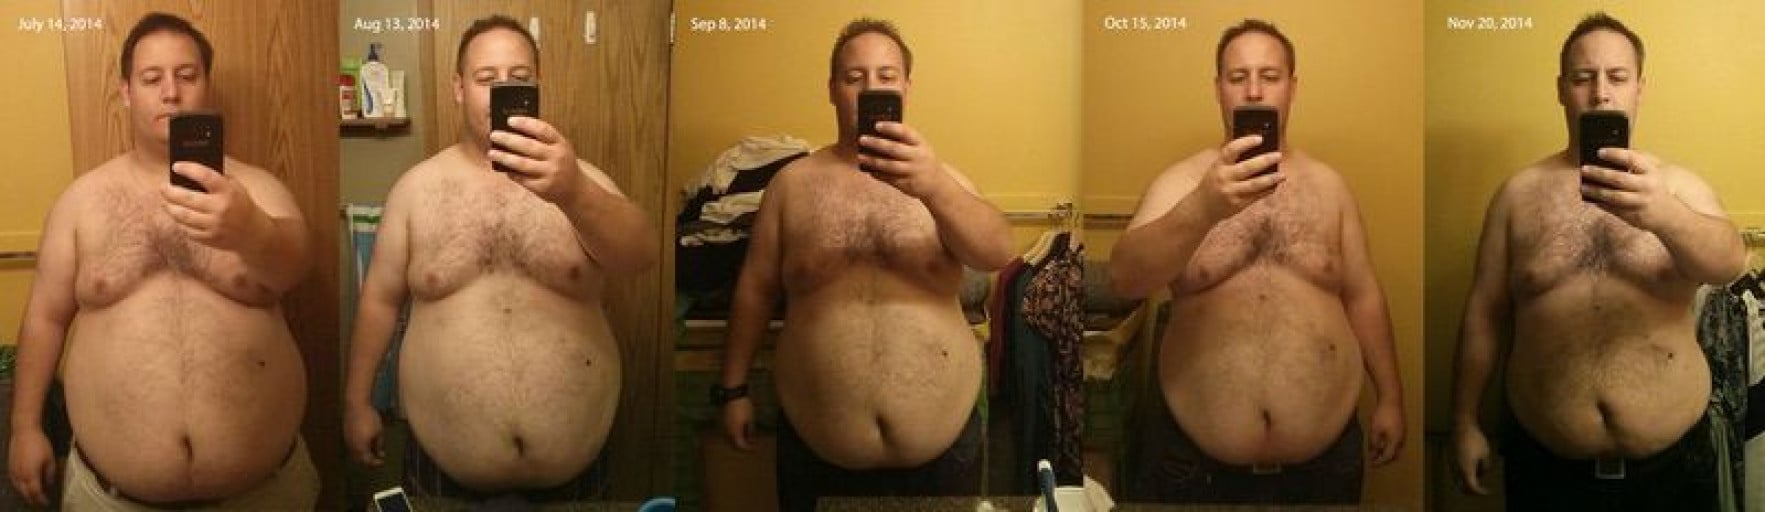 5 feet 7 Male Before and After 46 lbs Fat Loss 310 lbs to 264 lbs